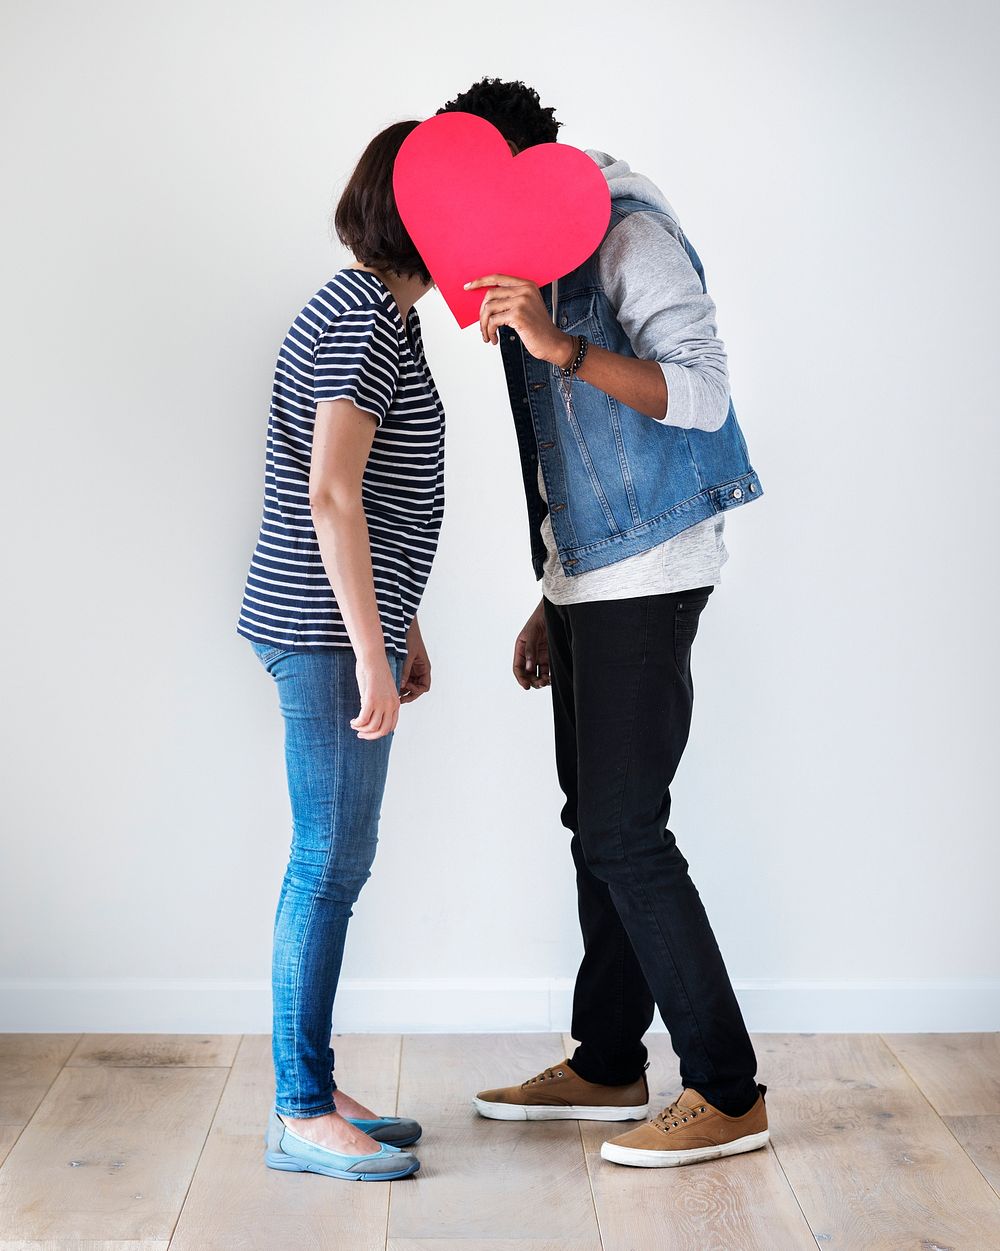 Interracial couple holding a red heart and kissing